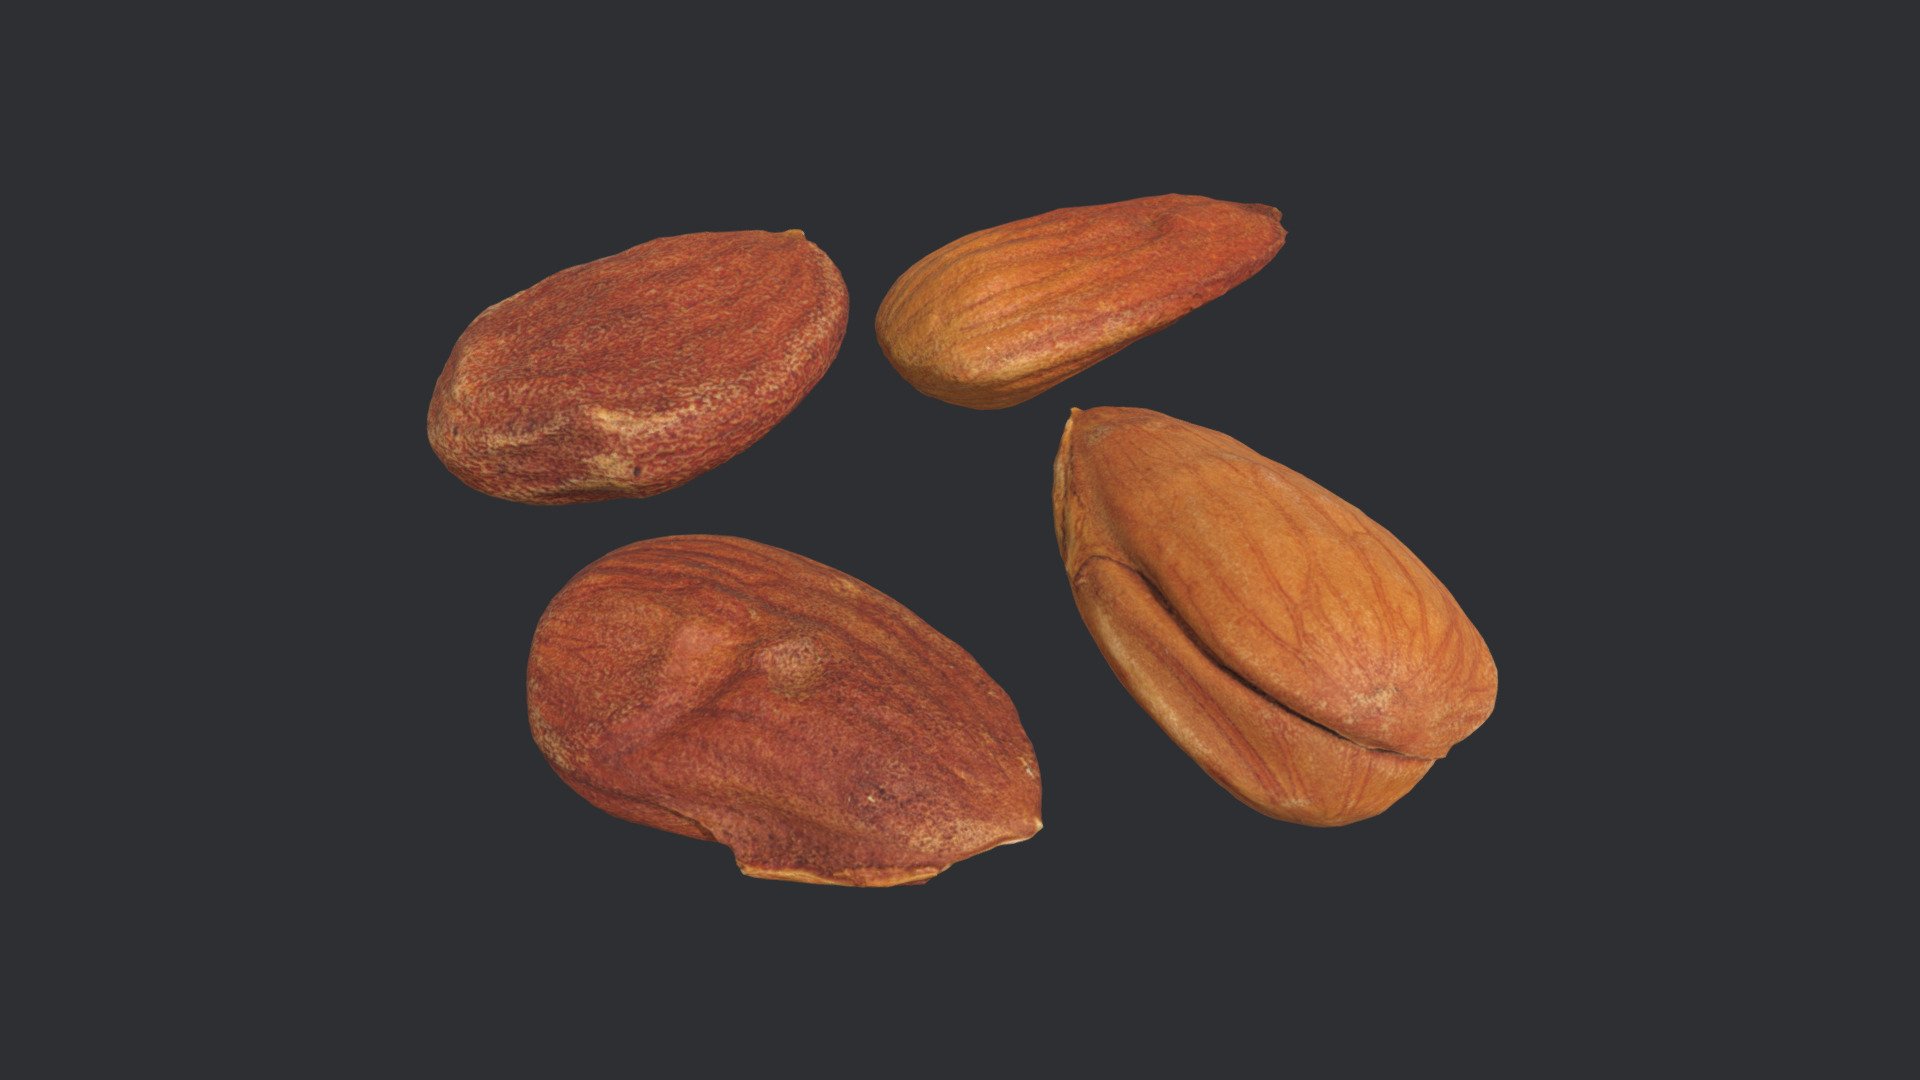 Four individual photogrammetry models of hazelnuts kernels.

All models retopologized/optimized into quads with clean UVs.

Each model has it’s own 4K PNG textures (Diffuse, Normal, Roughness and Ambient Occlusion).

2K JPG textures used for 3D preview

Real world scale 3d model